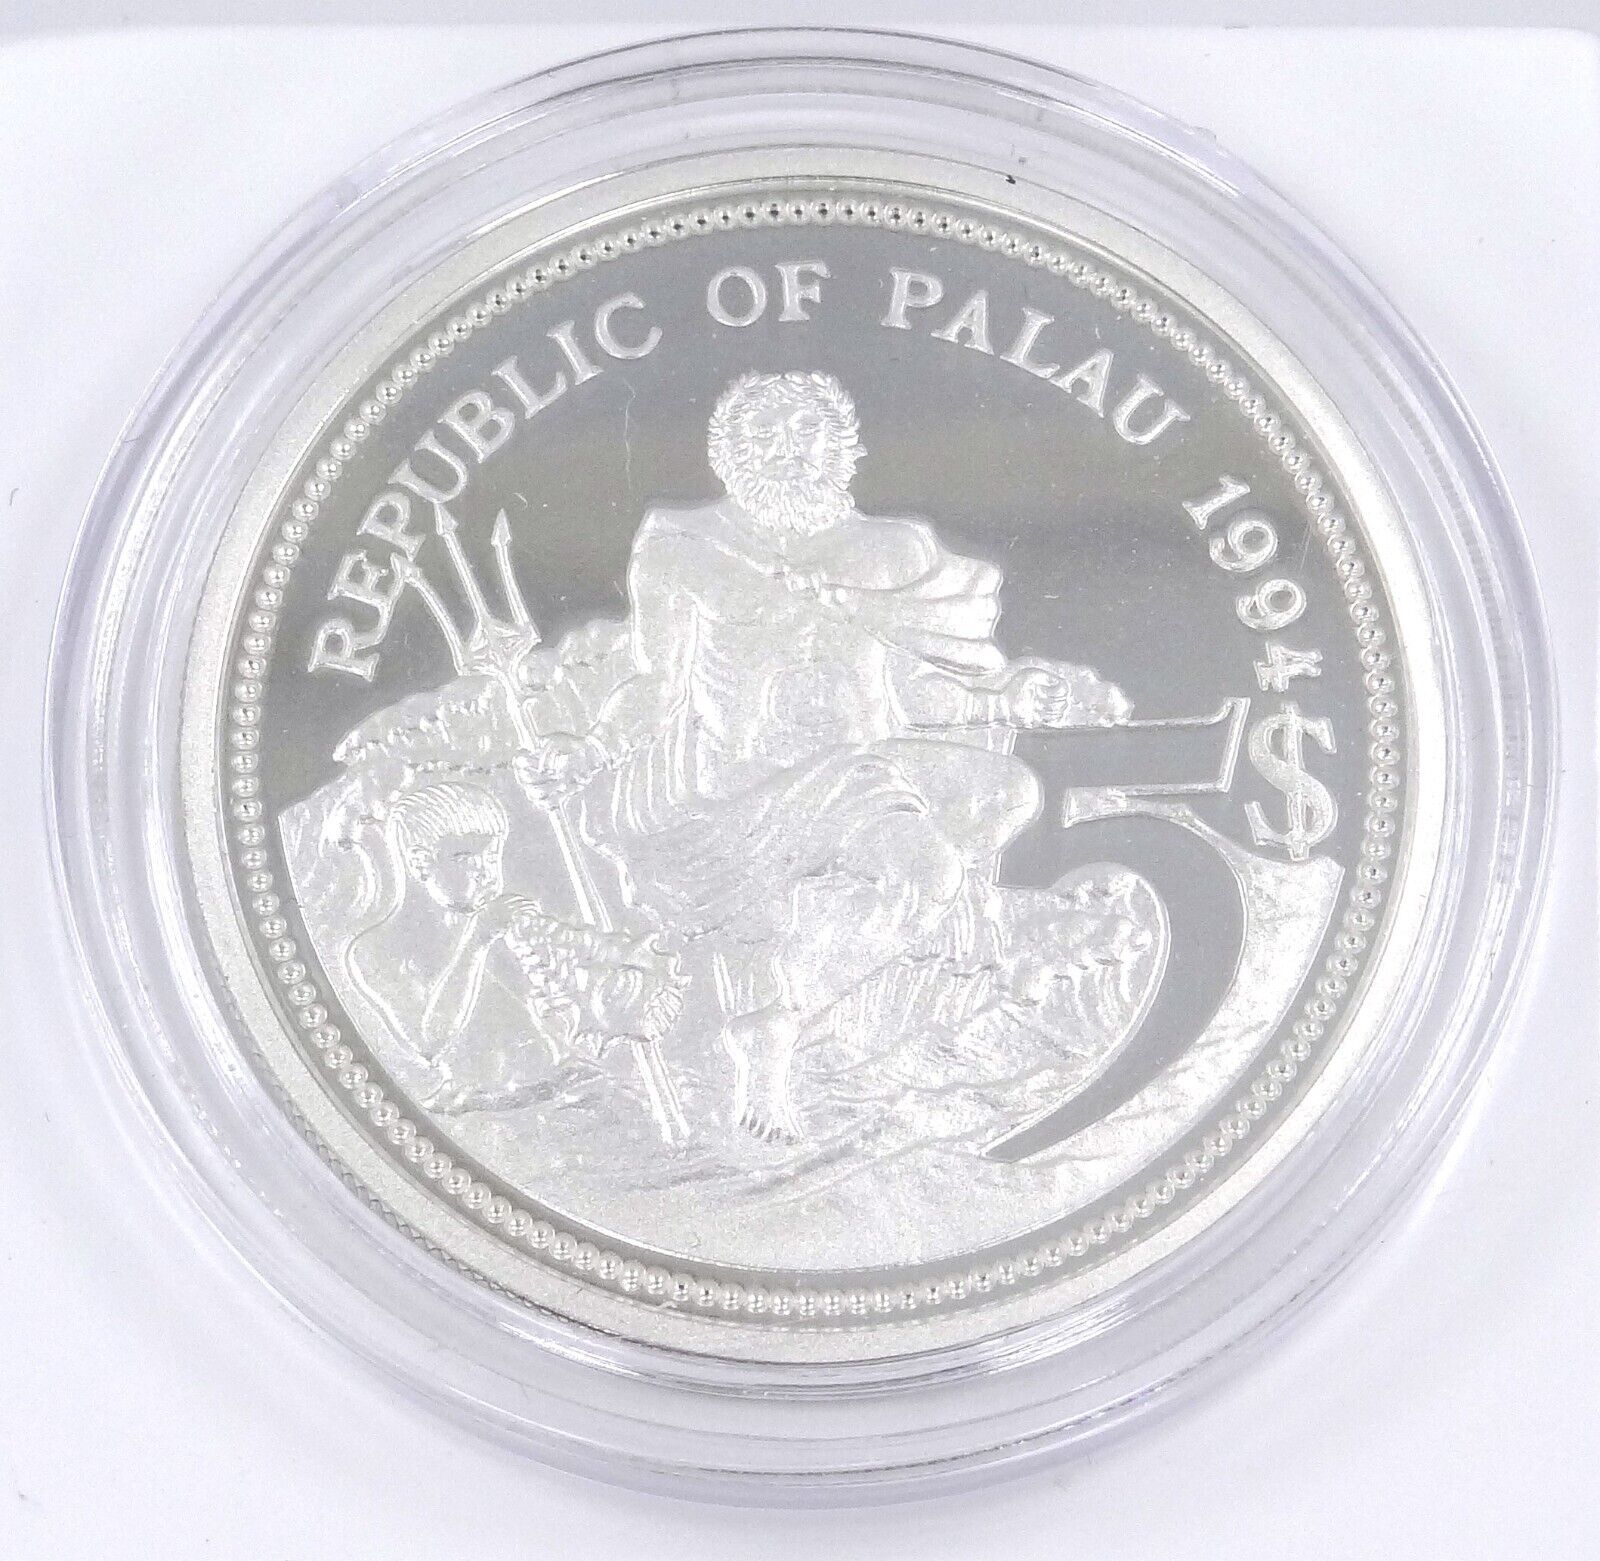 25g Silver Coin 1994 $5 Palau Color Proof Marine Life Protection-classypw.com-1